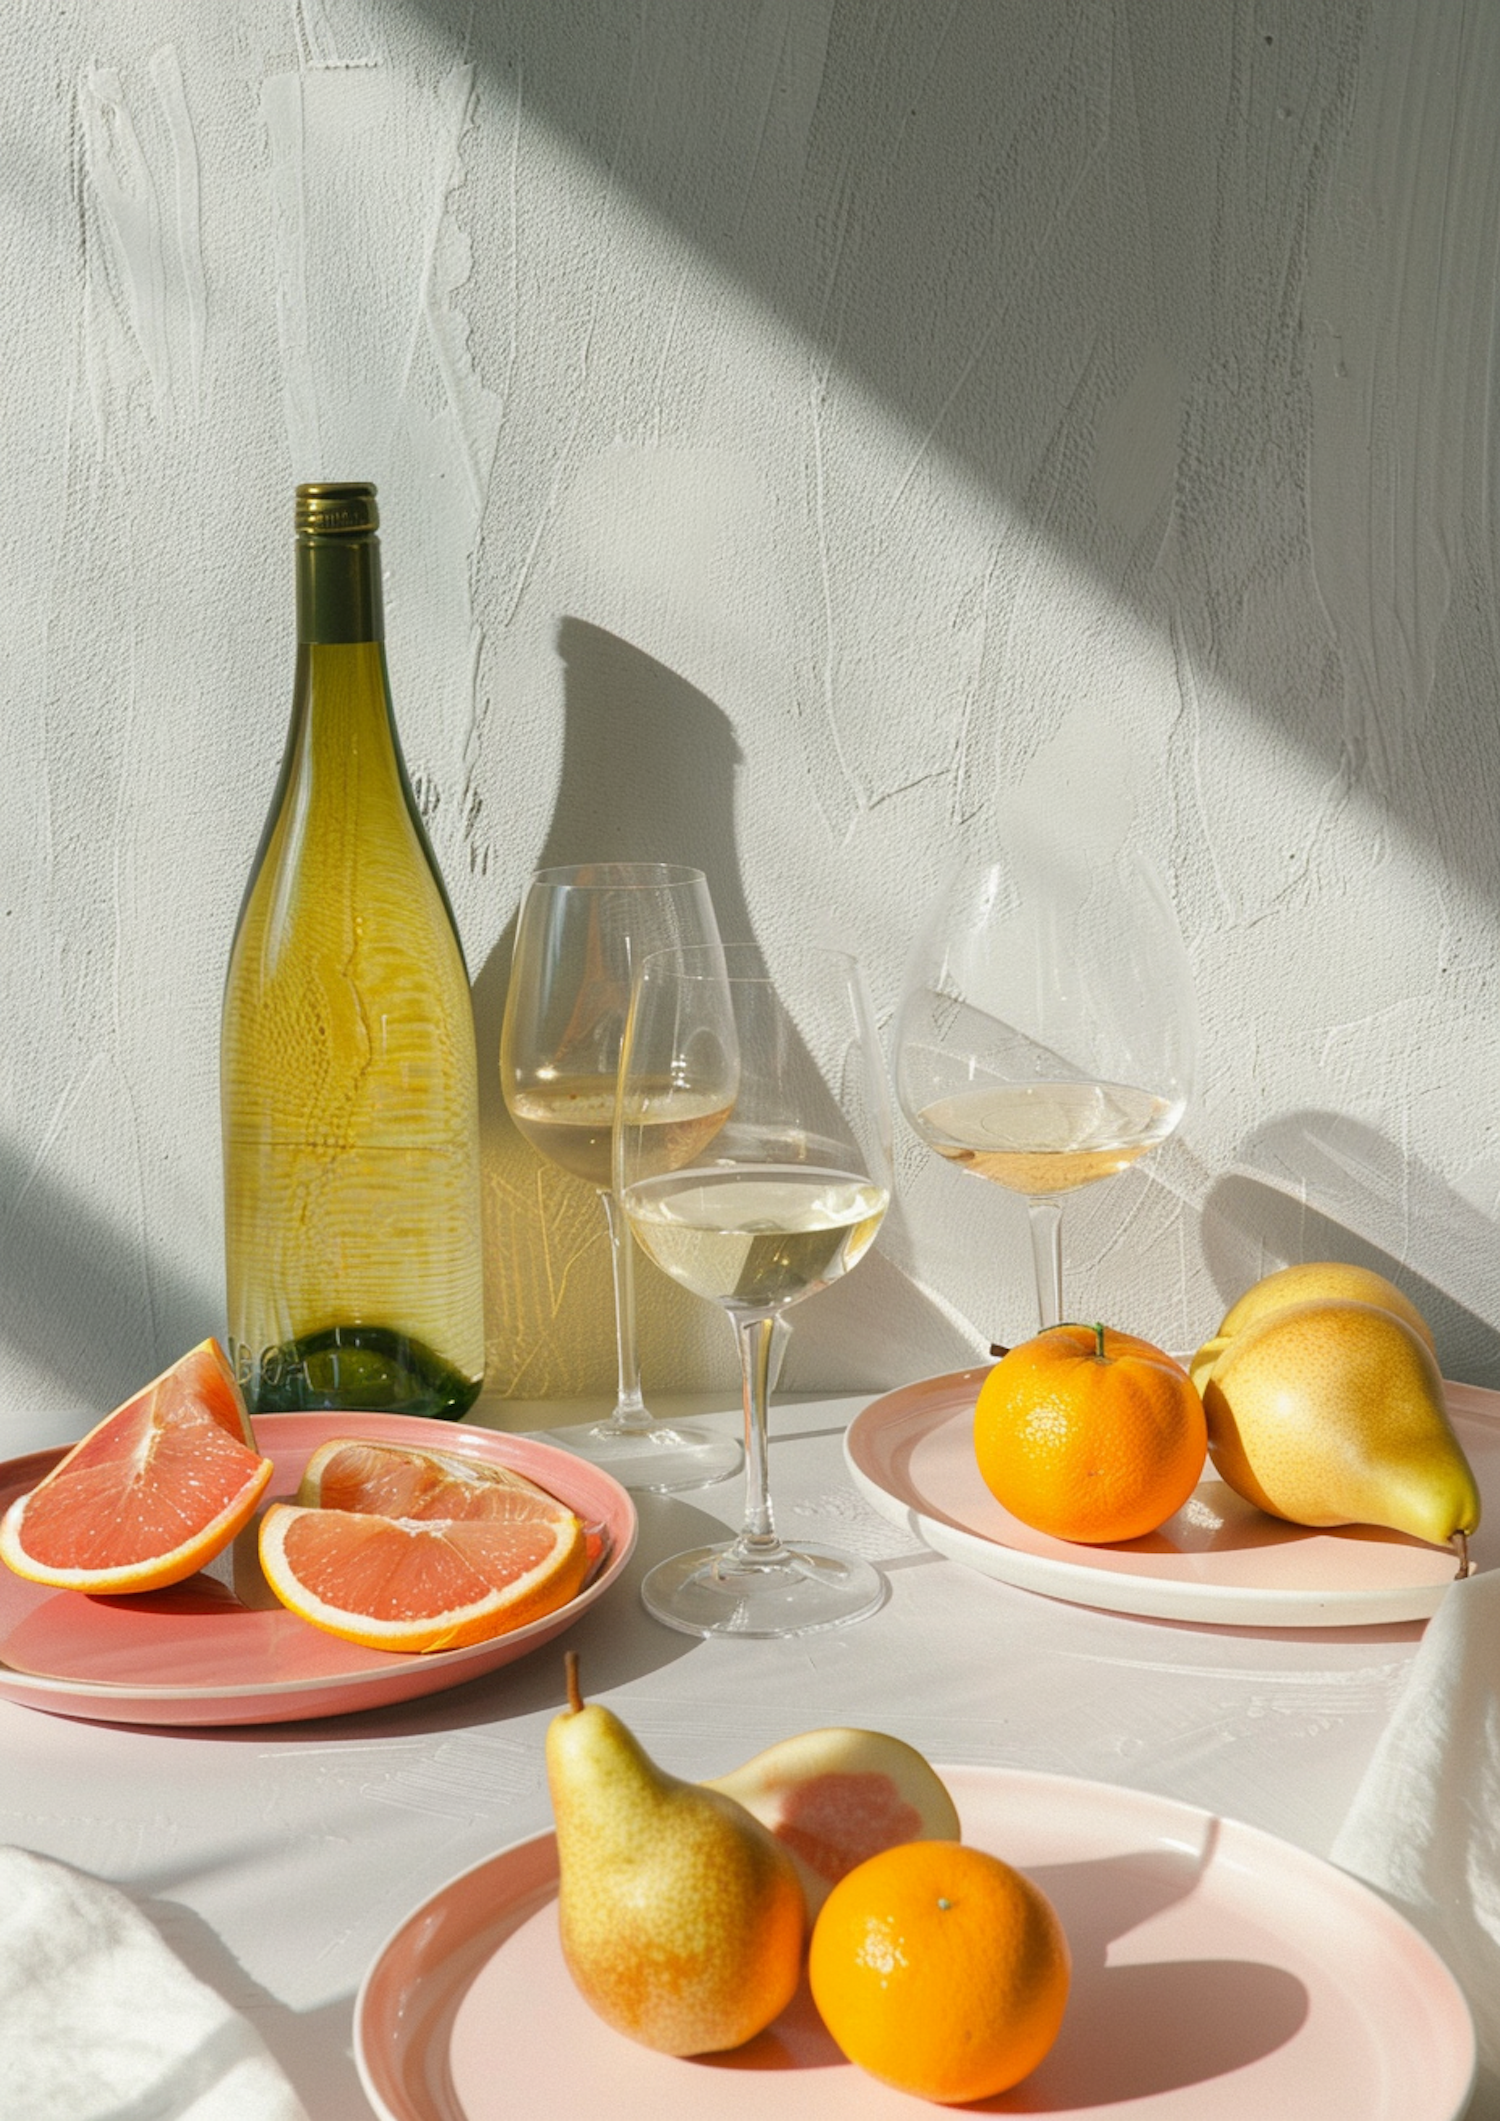 Serene Afternoon Still Life with Wine and Citrus Fruits